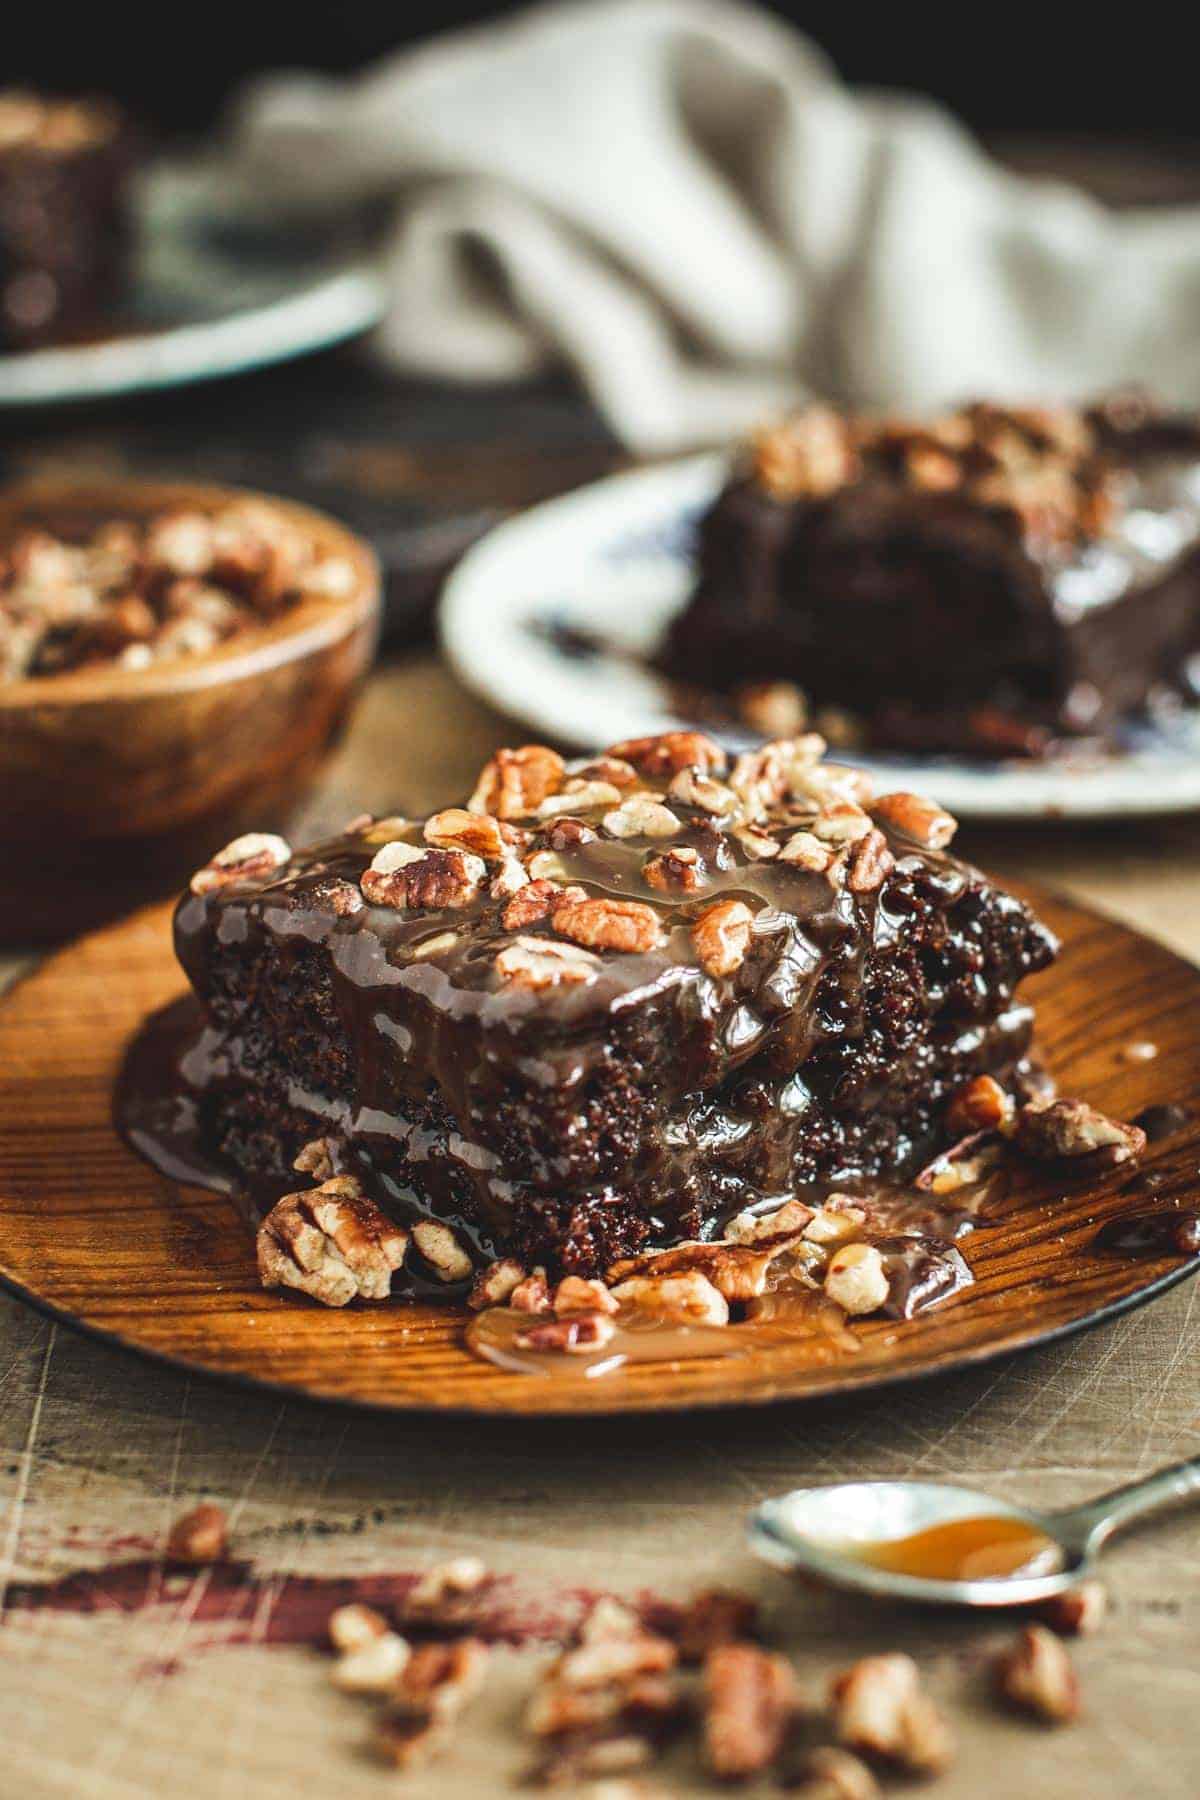 Slice of turtle cake covered with chopped pecans on a wooden plate.